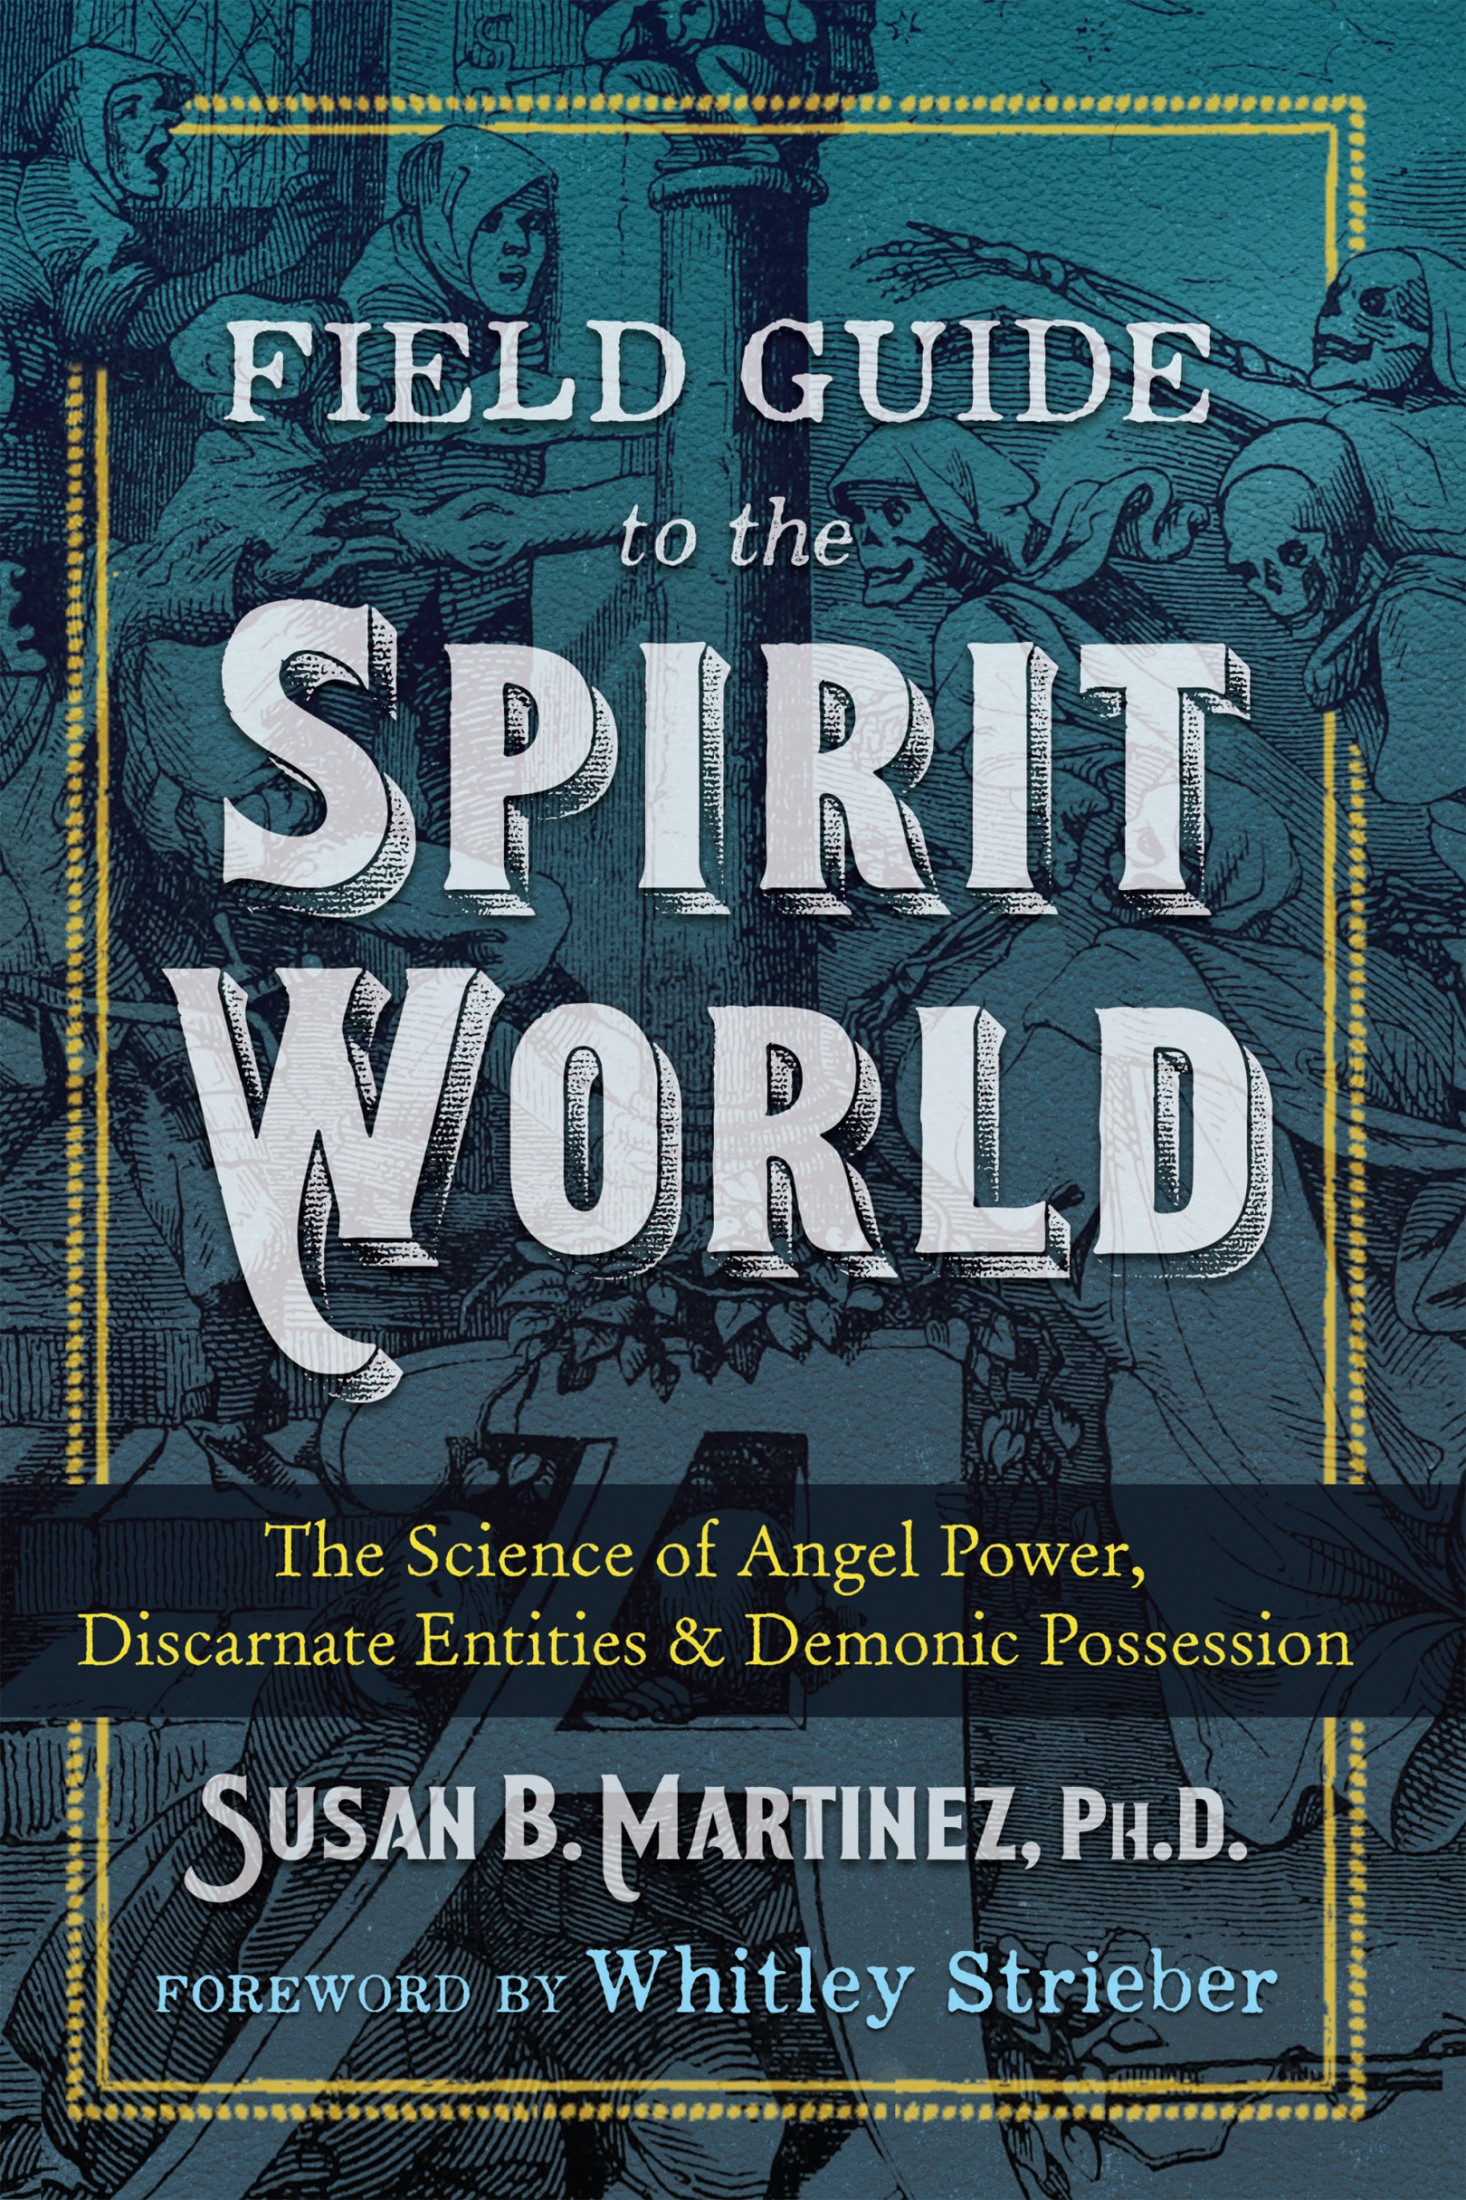 Field Guide to the Spirit World